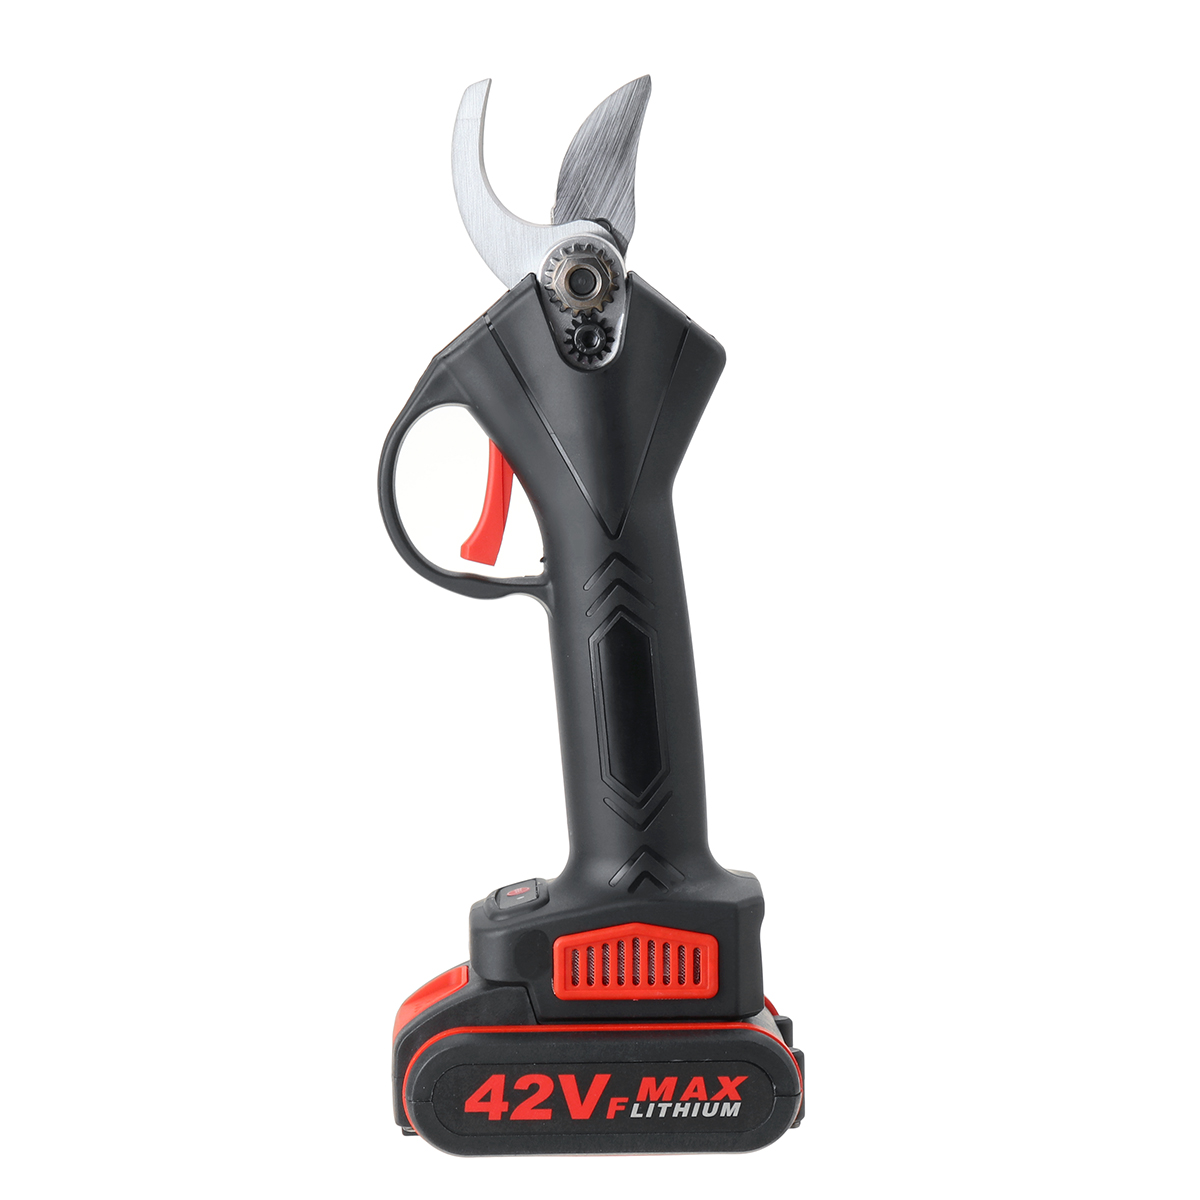 42VF-Rechargeable-Electric-Pruning-Shears-Scissors-Branch-Cutter-Garden-Tool-W-1-or-2-Li-ion-Battery-1709169-9